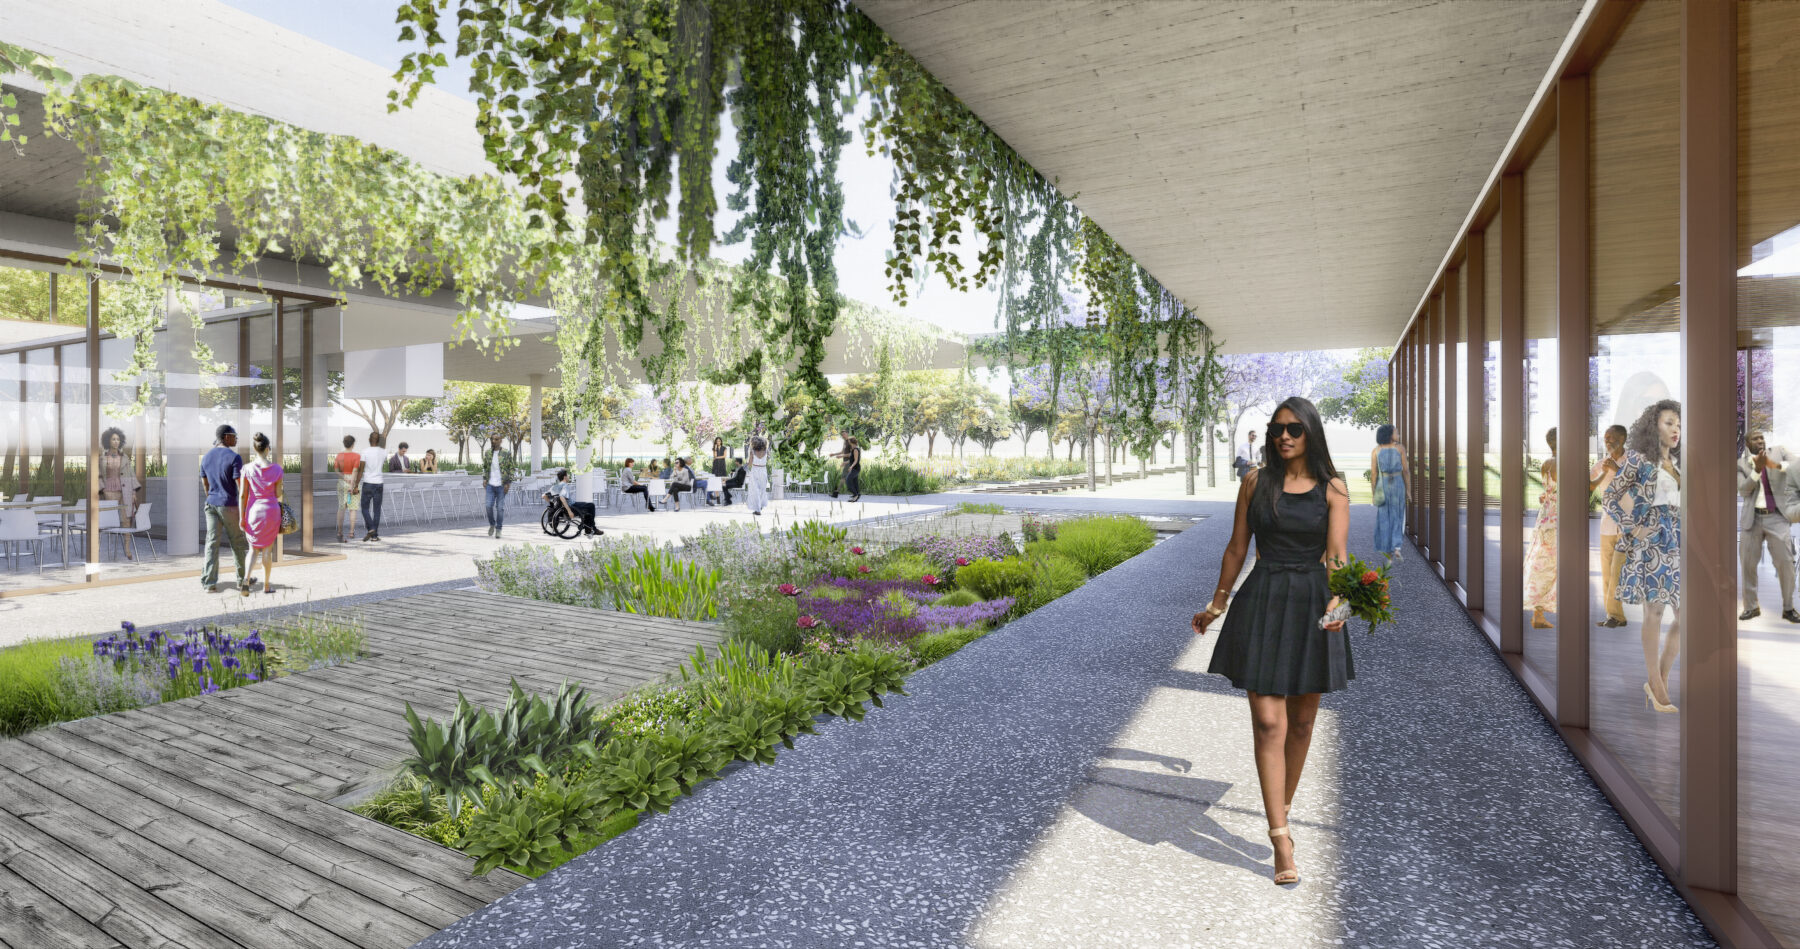 Early rendering of Bonnet Springs Park Event Center's courtyard and water garden, showing plants hanging from roof.